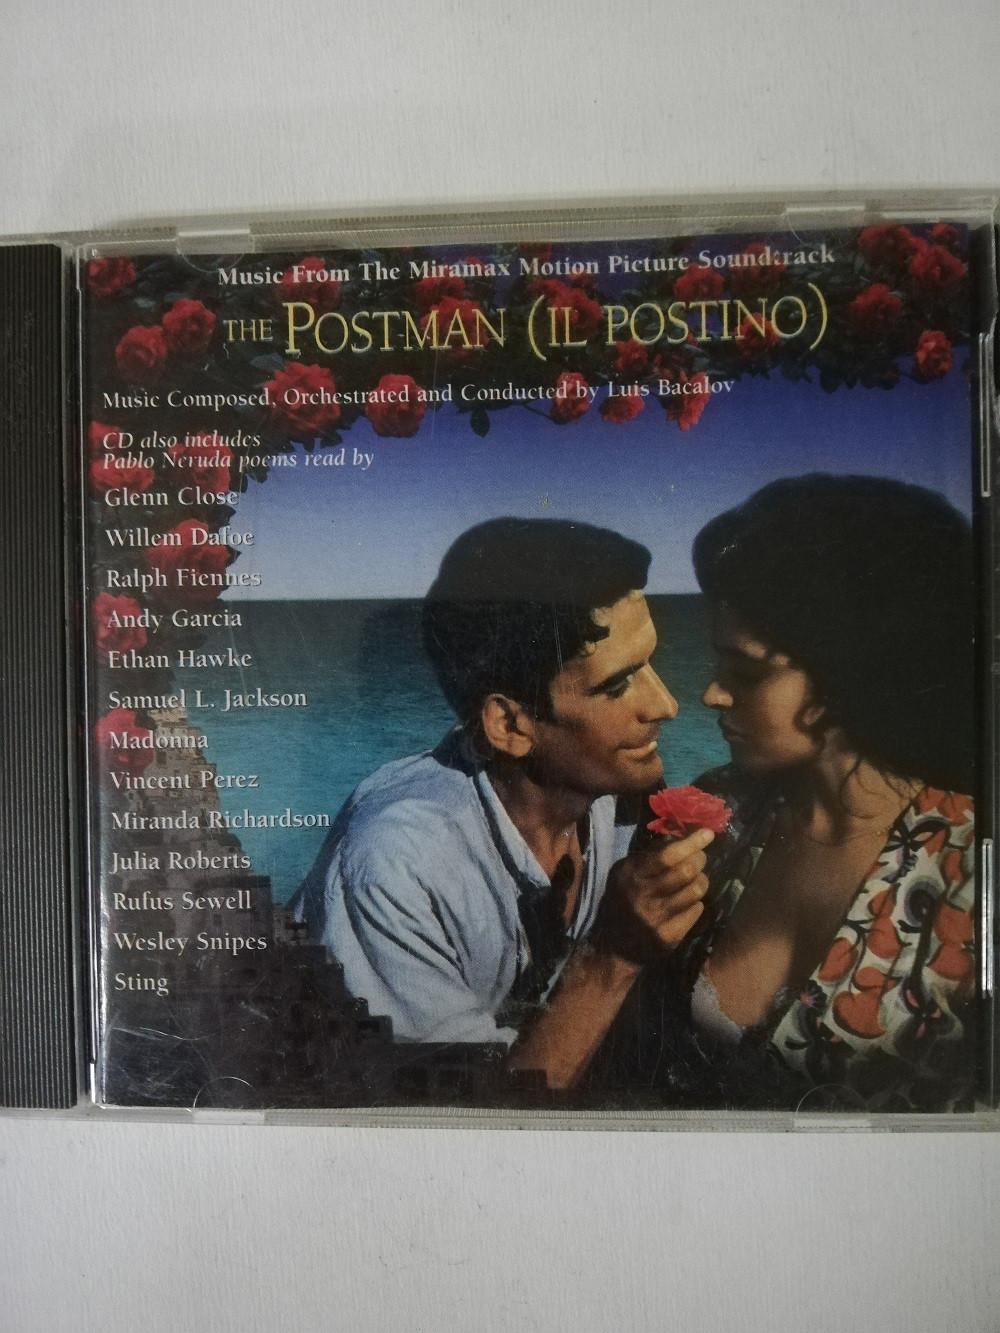 Imagen CD THE POSTMAN - MUSIC FROM THE MIRAMAX MOTION PICTURE SOUNDTRACK 1